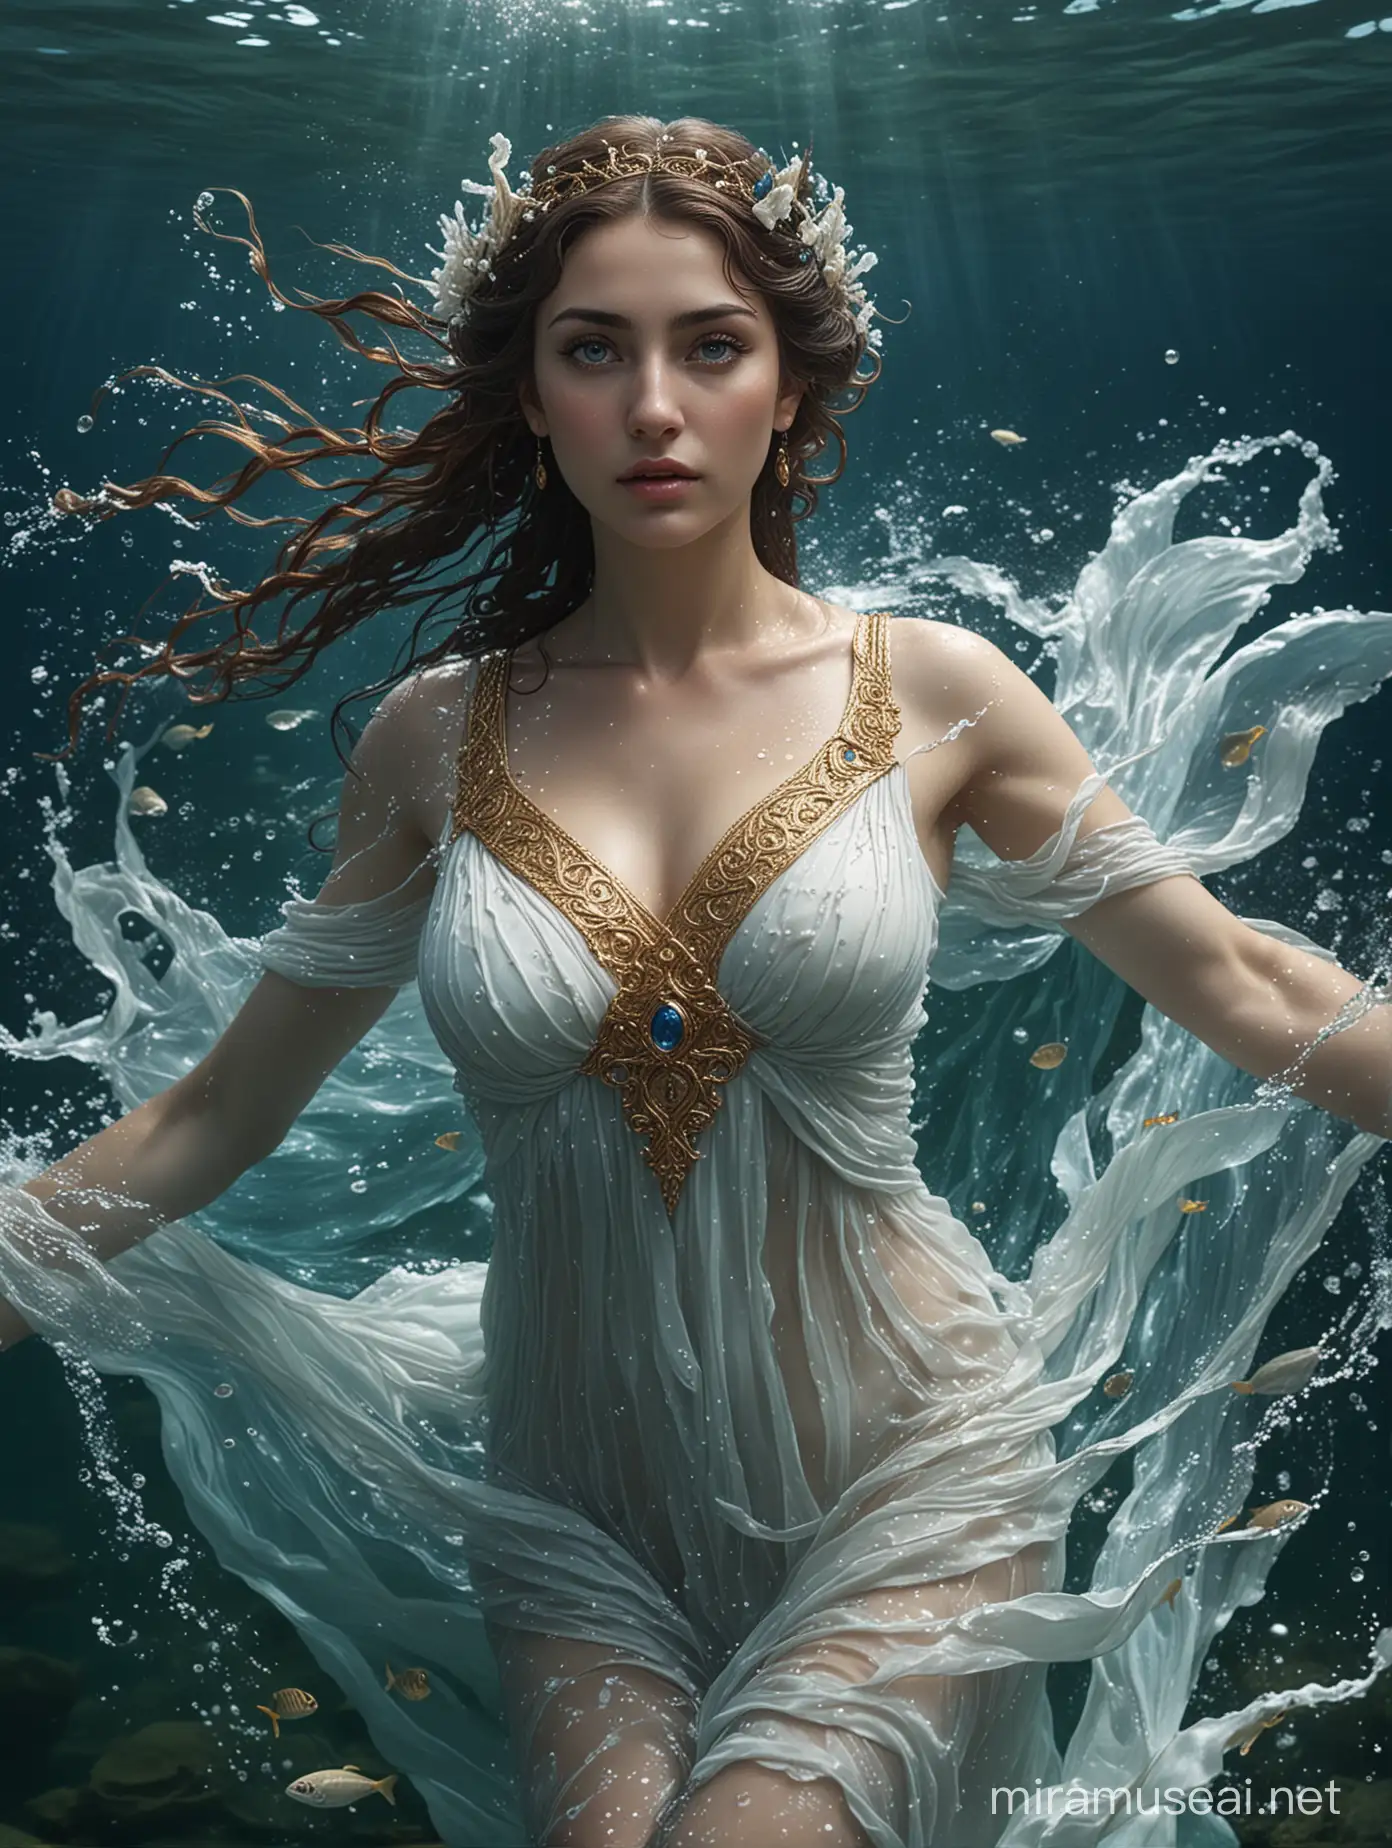 A masterpieced of Kimiya Hosseini as Leucothea, Greek goddess of the sea. She is under the sea, and her Greek dress flows ethereally in the water until it mixes with the water until it disappears. She has has blue eyes. Realistic photo.